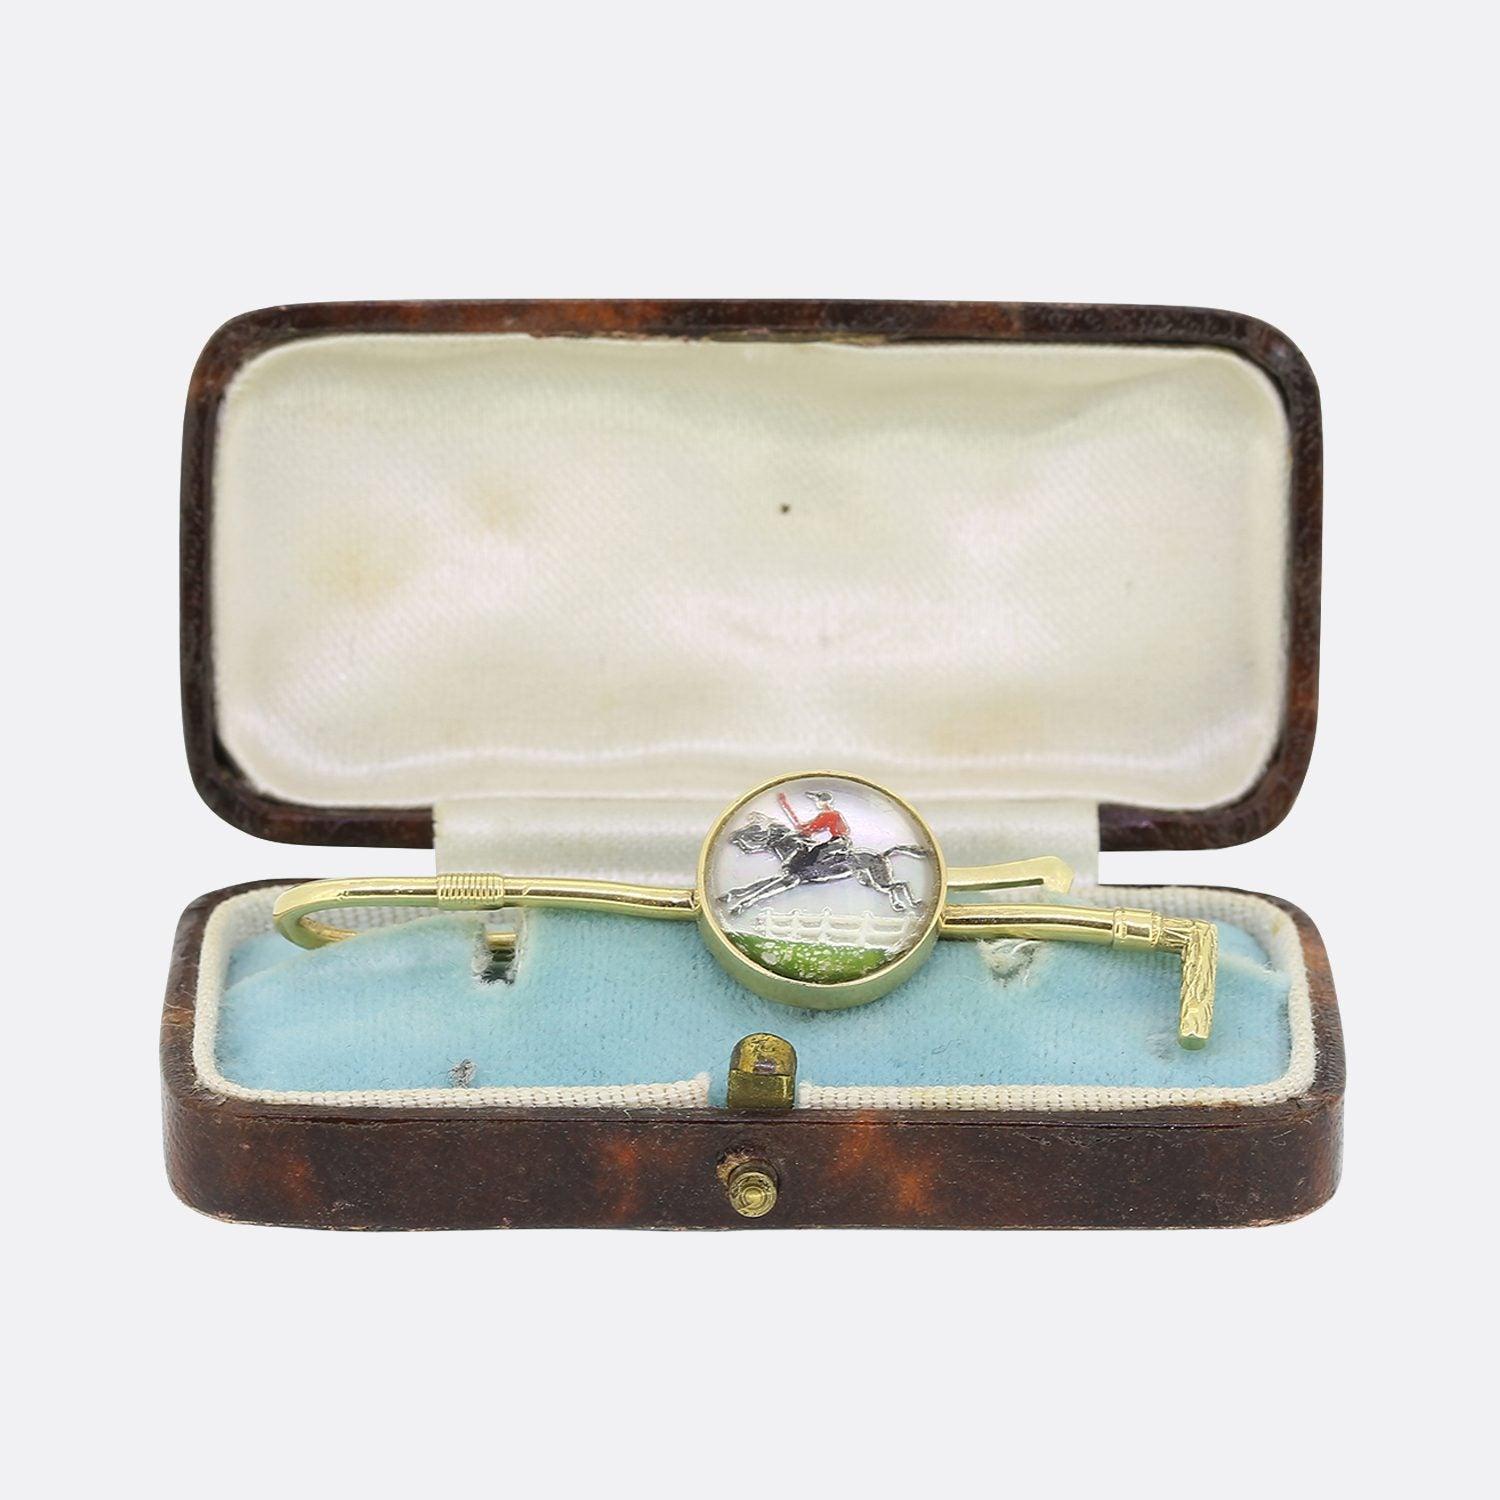 This is a 14ct yellow gold essex crystal tie clip/slide. The essex crystal is of an excellent quality depicting a jockey riding a jumping race horse.

Condition: Used (Very Good)
Weight: 7.8 grams
Dimensions: 54mm x 14mm x 12mm
Marked: '14K'
Tested